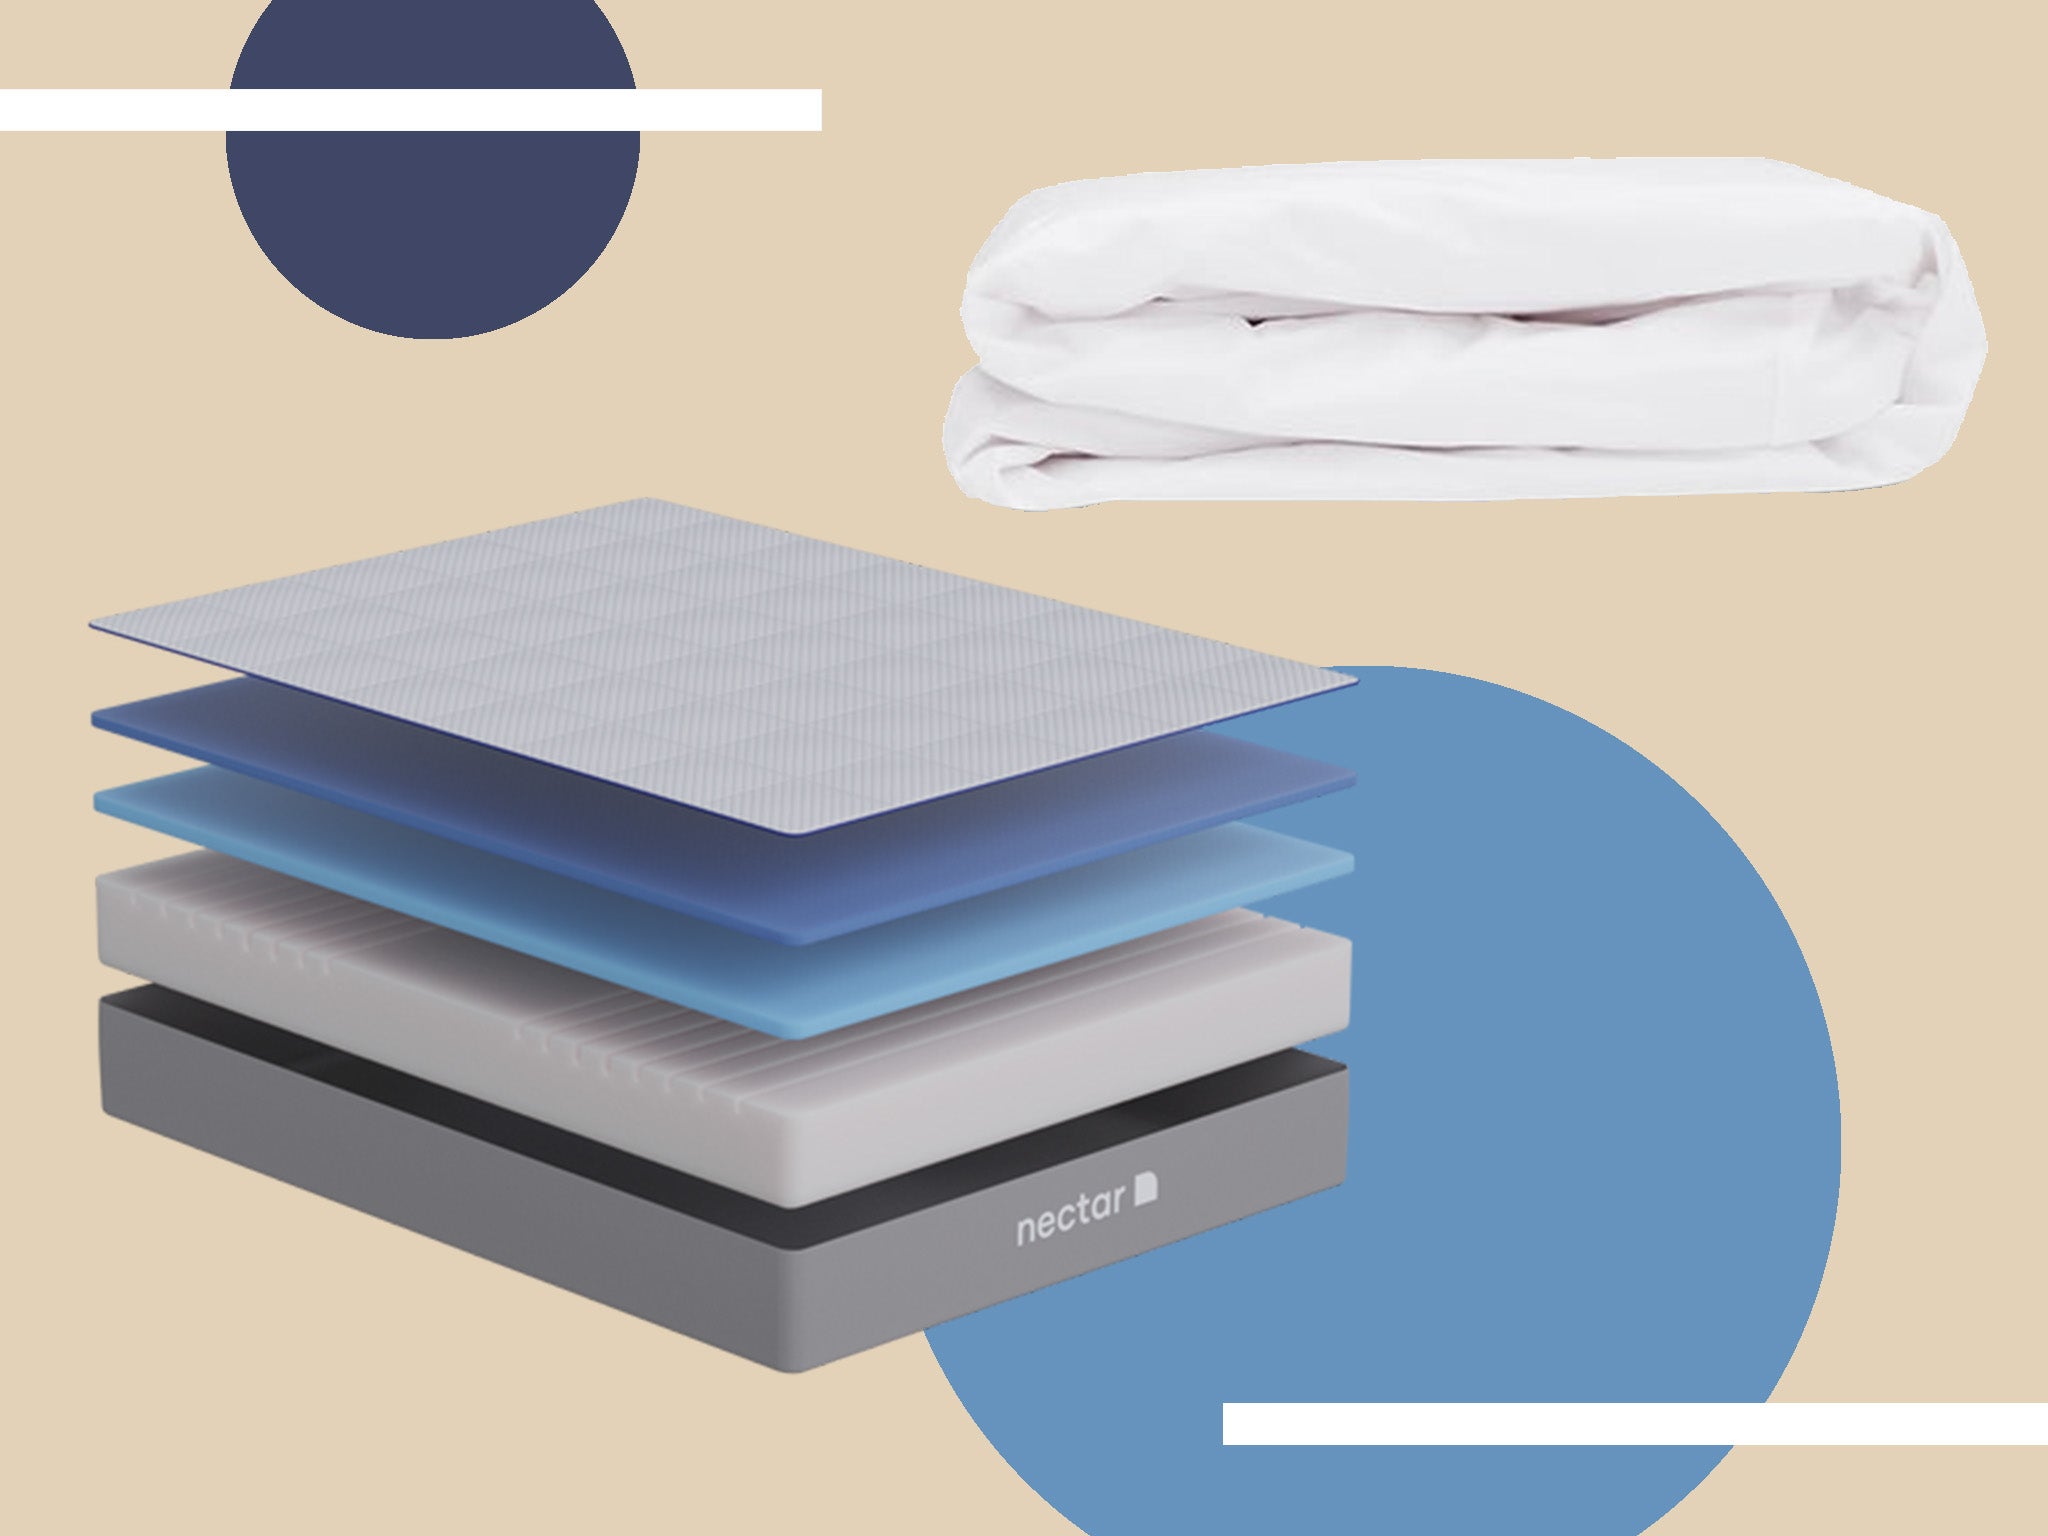 The memory foam mattress comes with an impressive 365-night trial